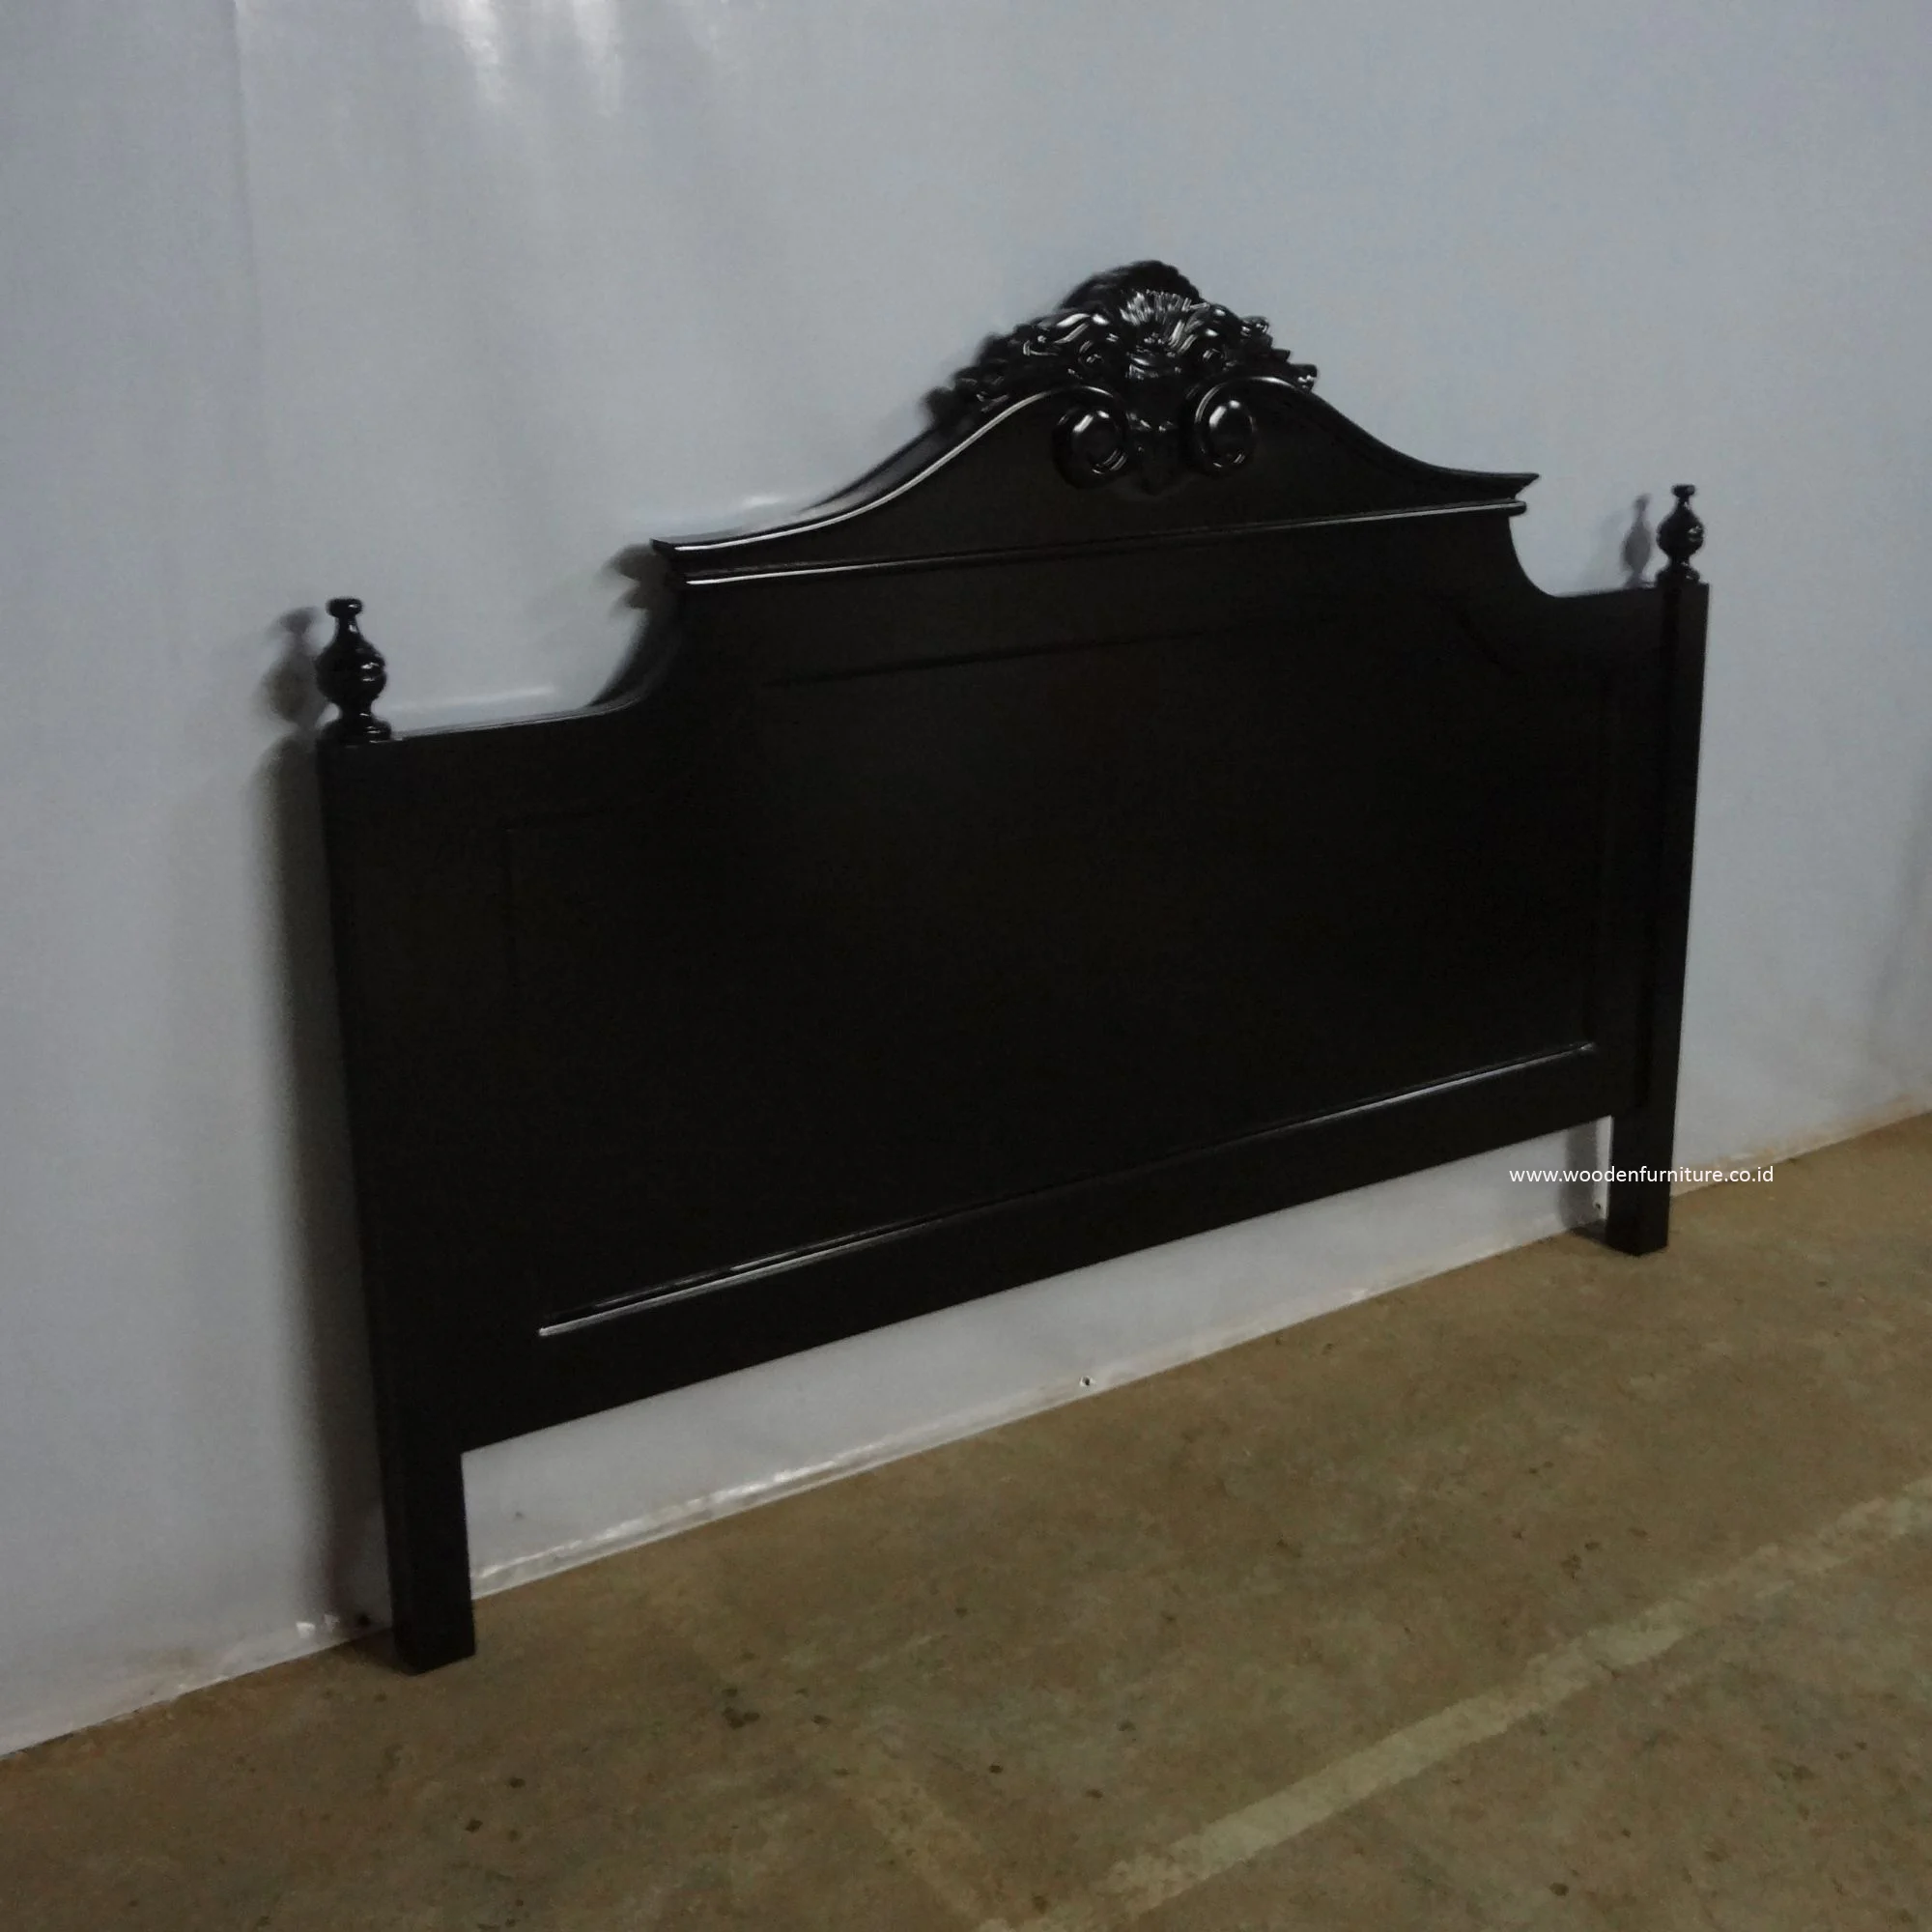 French Style Bed Head Antique Bedroom Furniture European Style Home Furniture Antique Headboard Wooden Headboard Buy French Style Bed Wooden Headboard European Style Bedroom Furniture Product On Alibaba Com